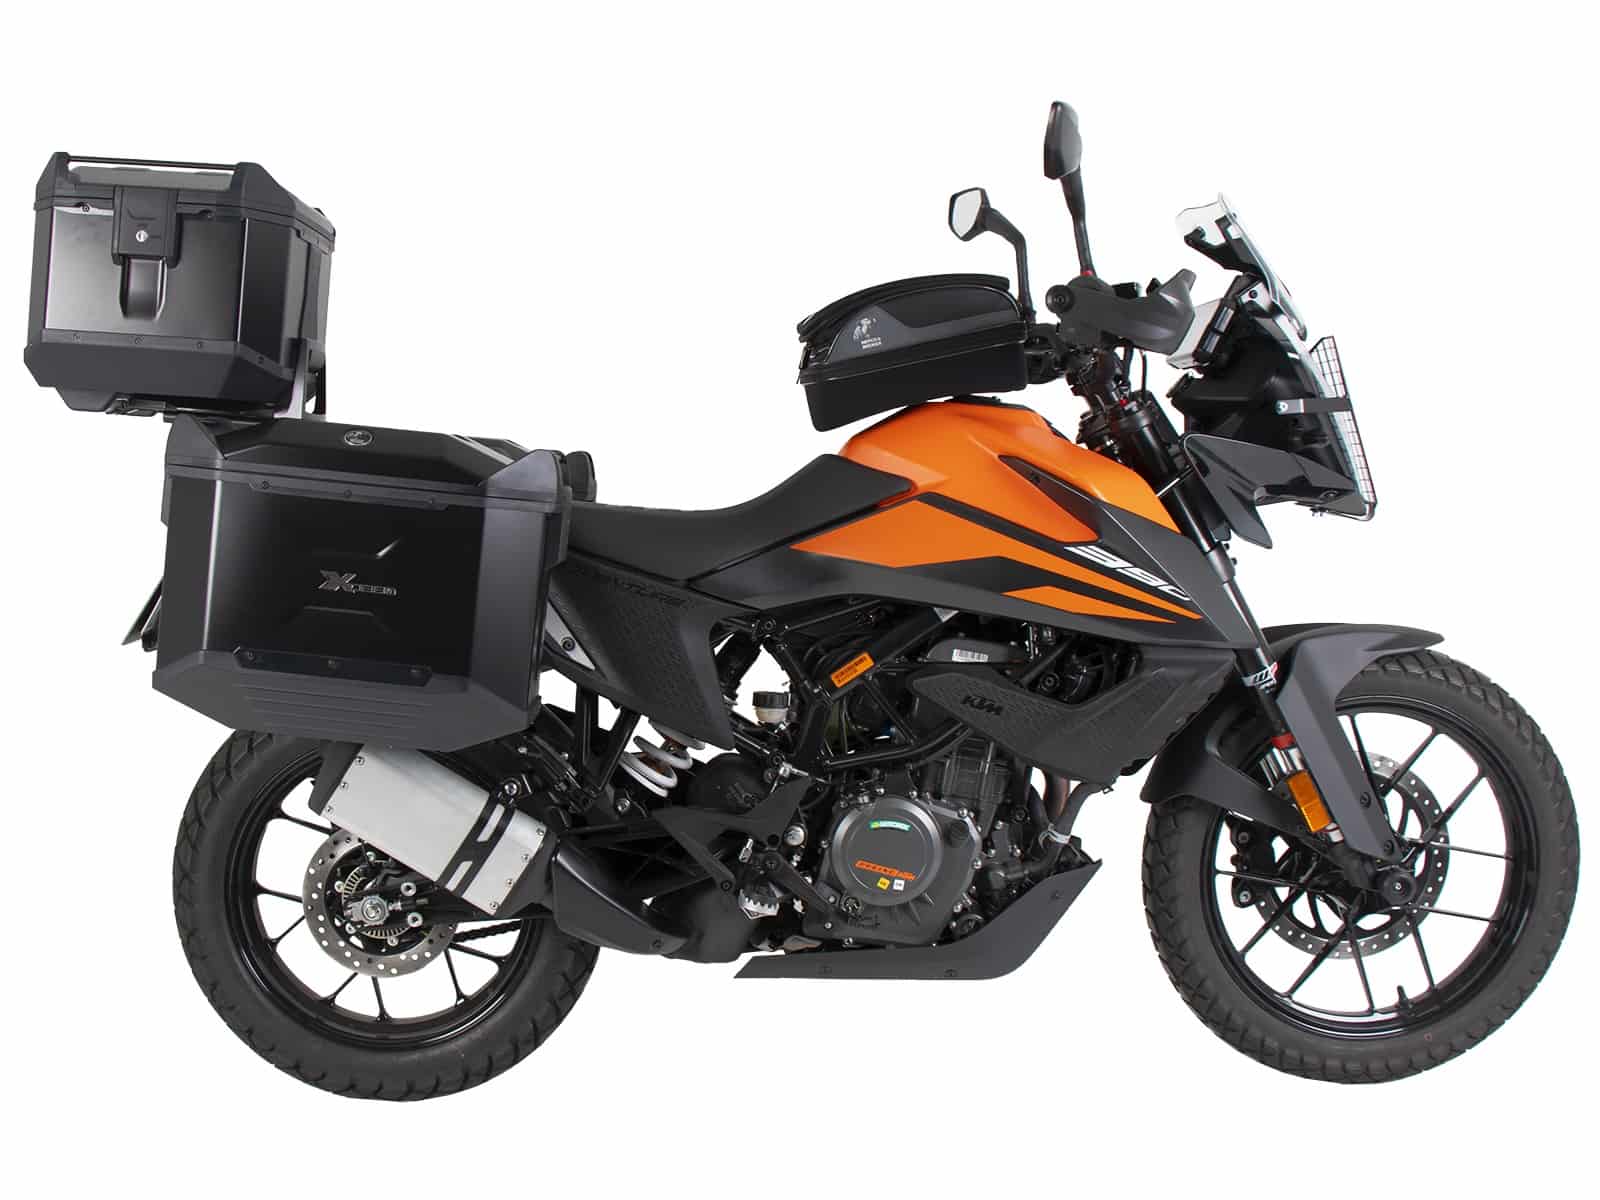 Luggage rack with passenger grip for KTM 390 Adventure 20 